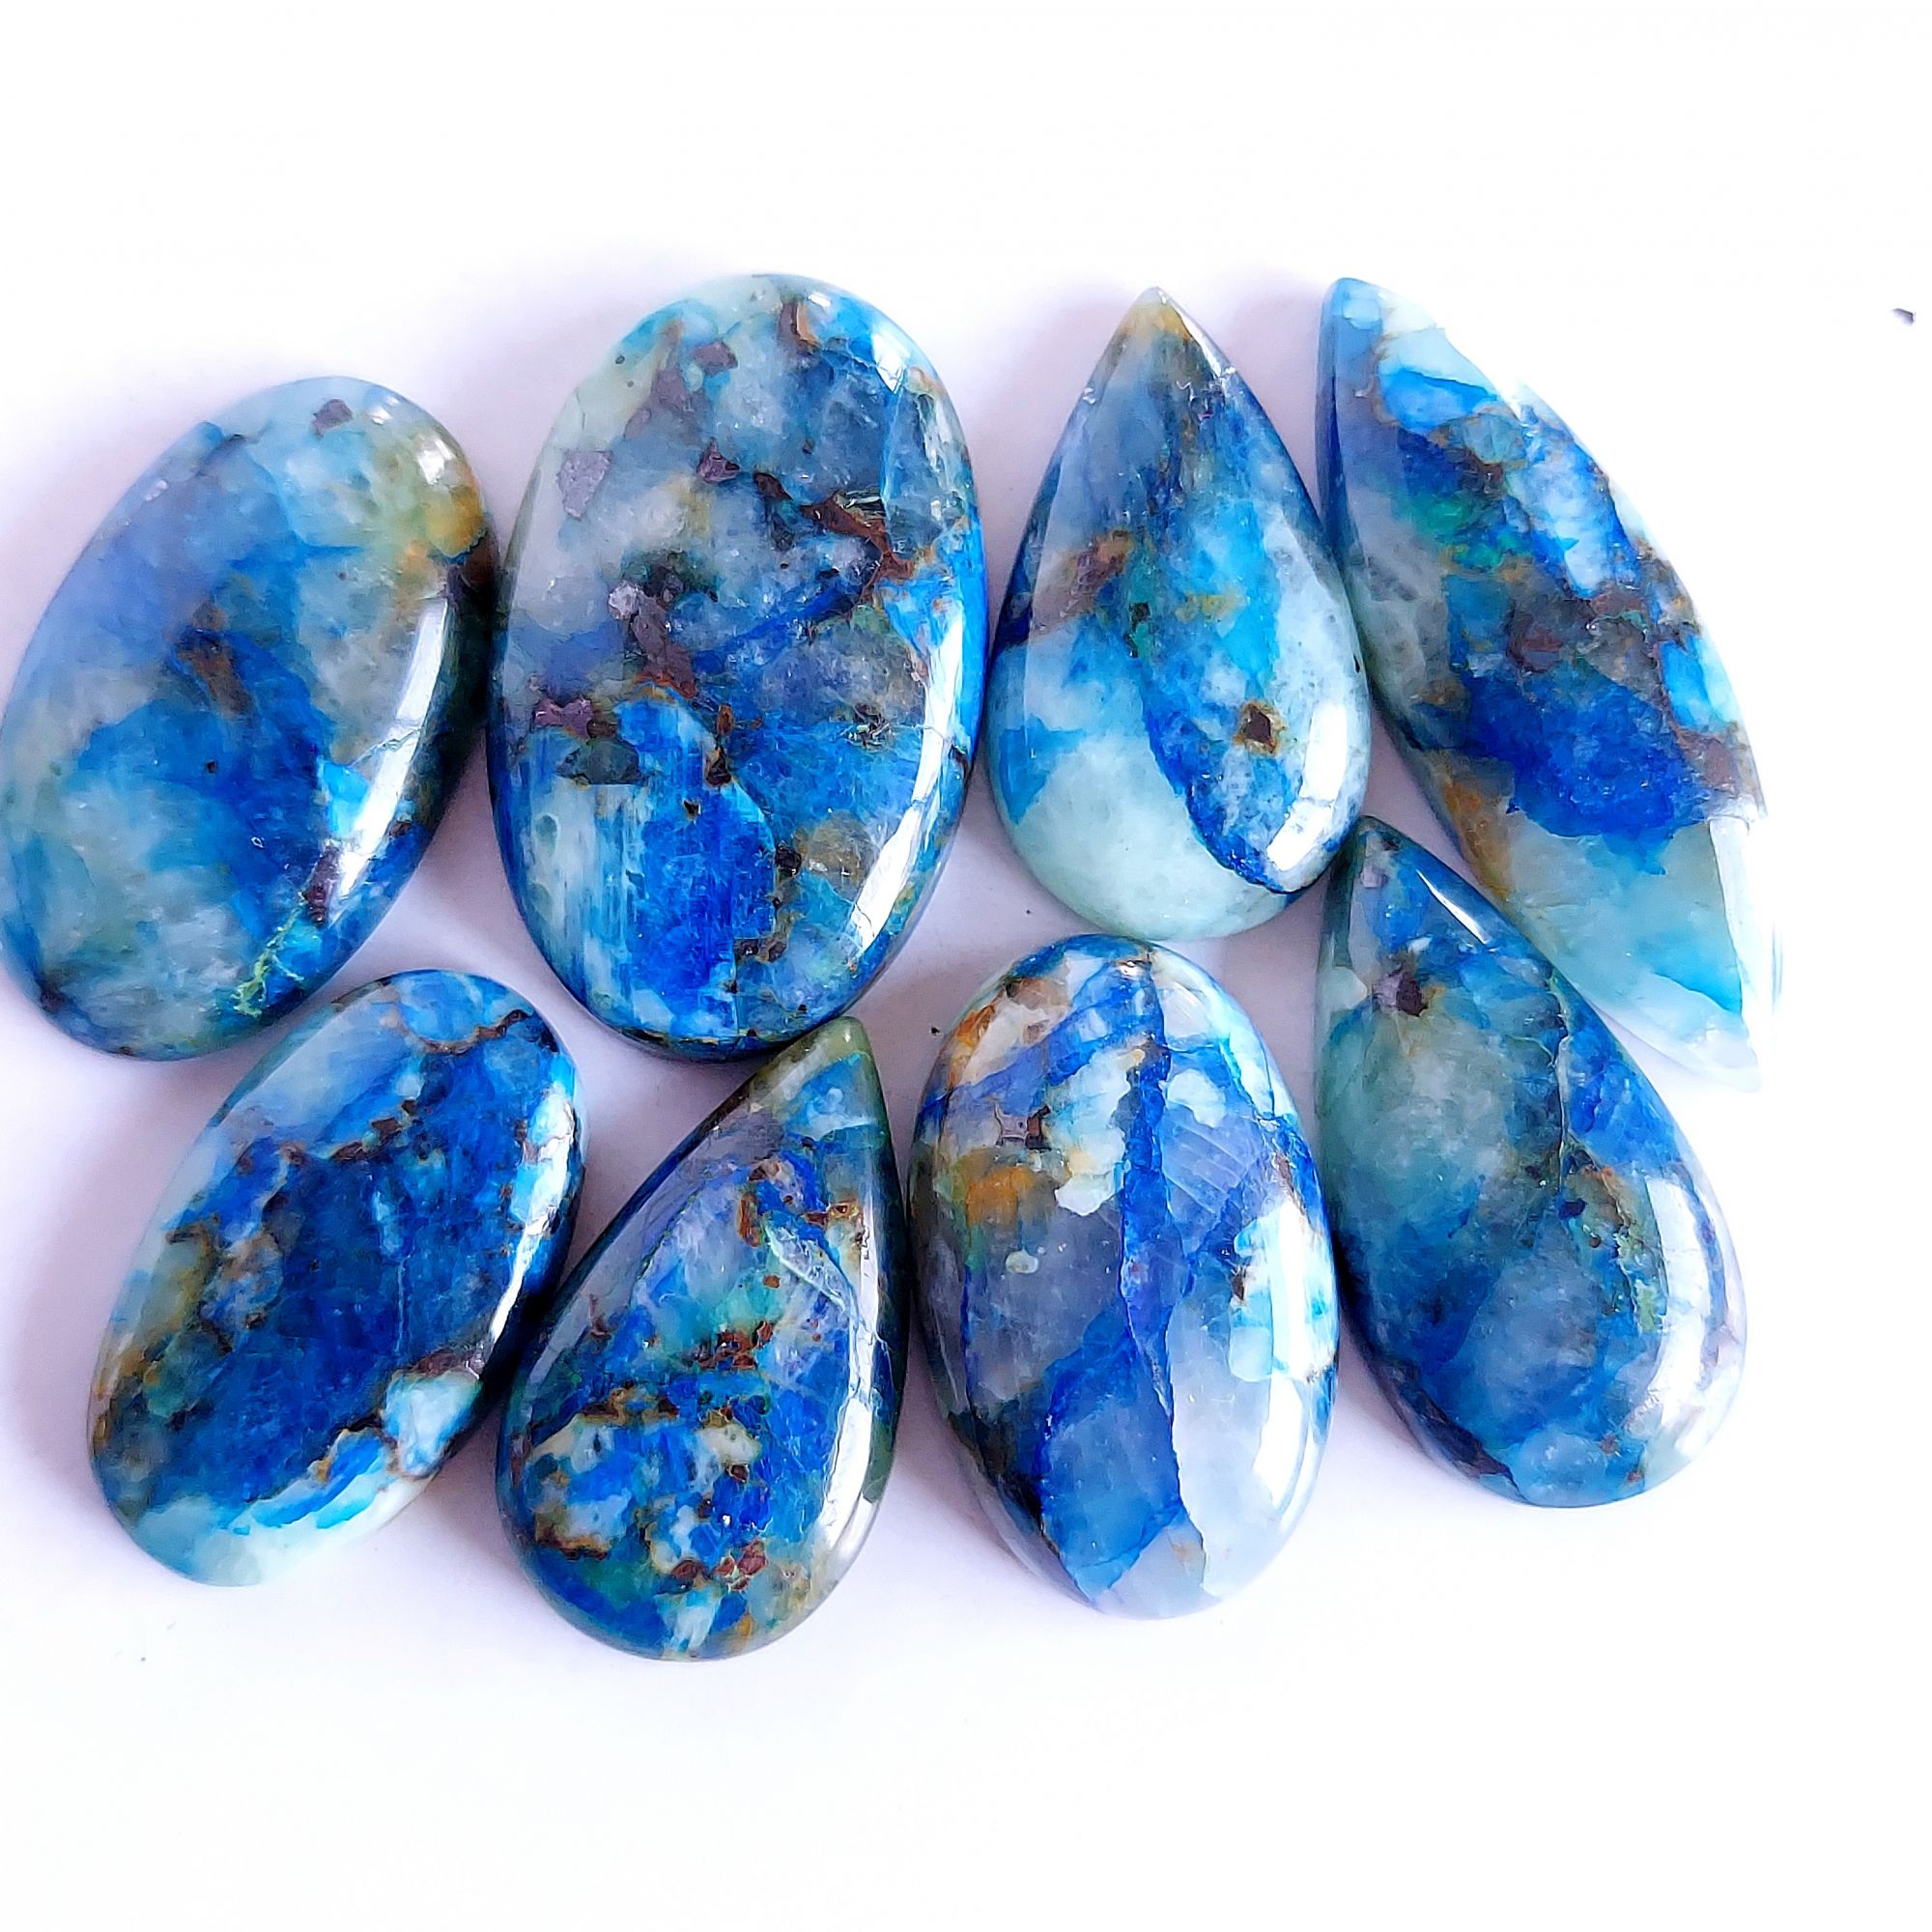 246.Cts 8 Pcs Natural Smooth Azurite Mix Loose Gemstone Cabochon Lot Size 35x22 28x14mm Wholesale Gemstone For jewelry